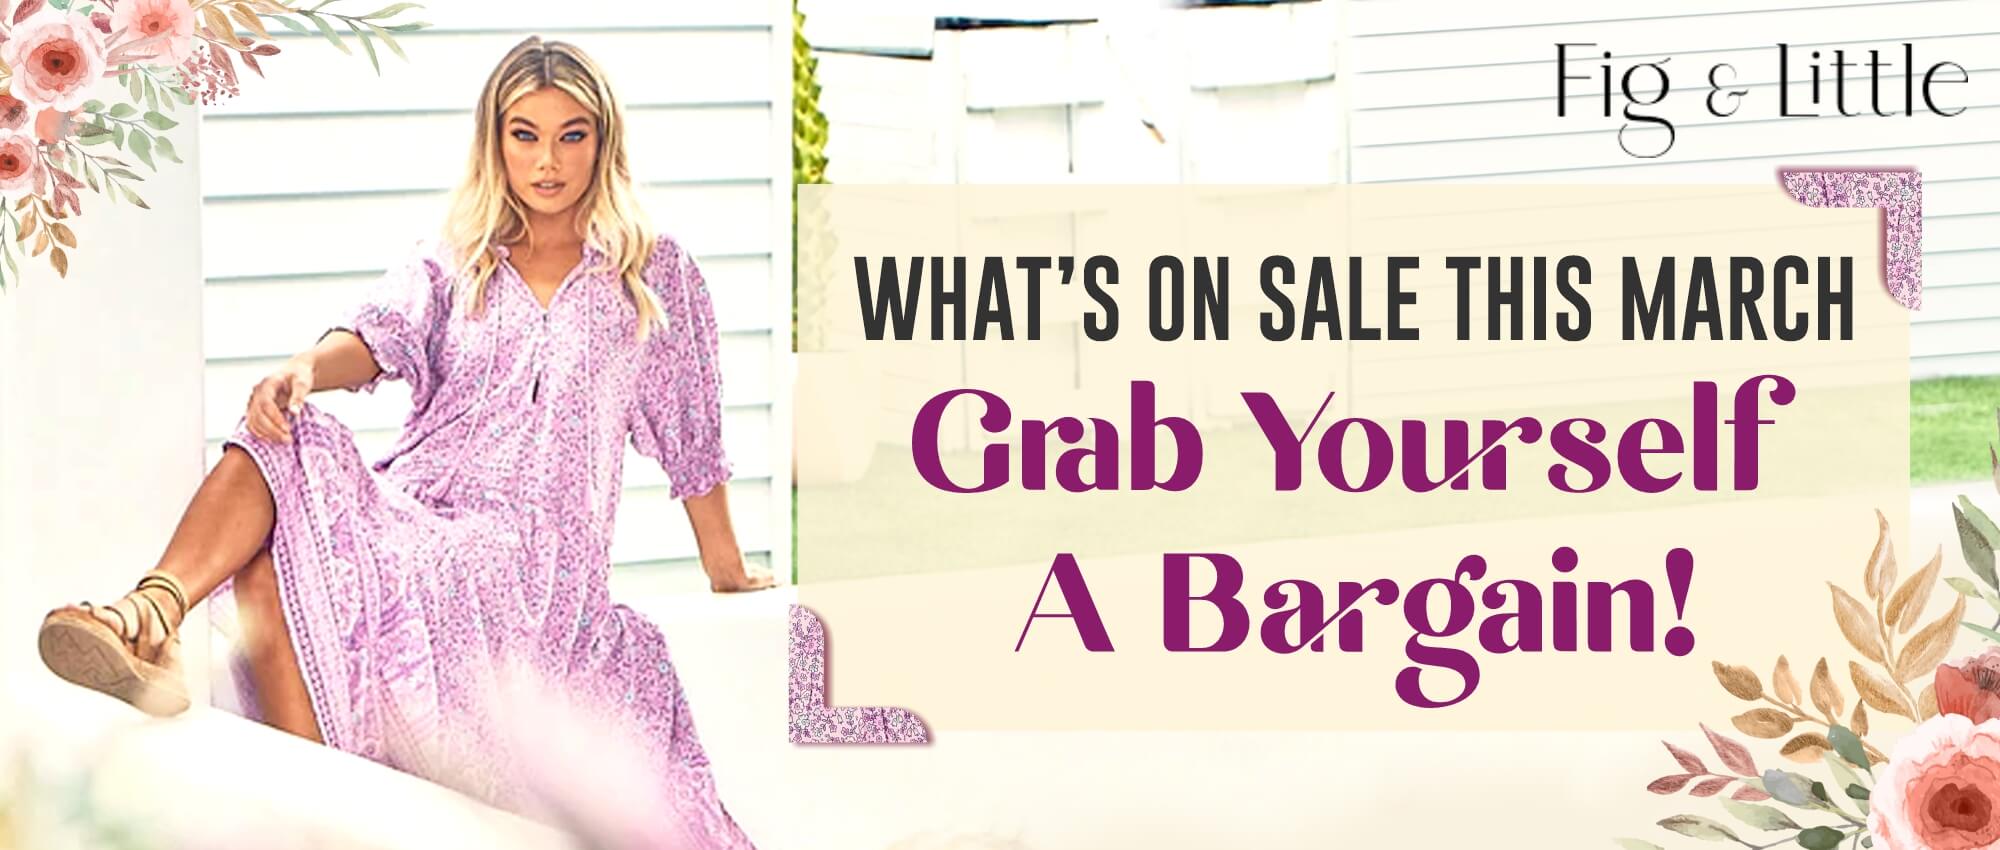 WHAT’S ON SALE THIS MARCH – GRAB YOURSELF A BARGAIN!